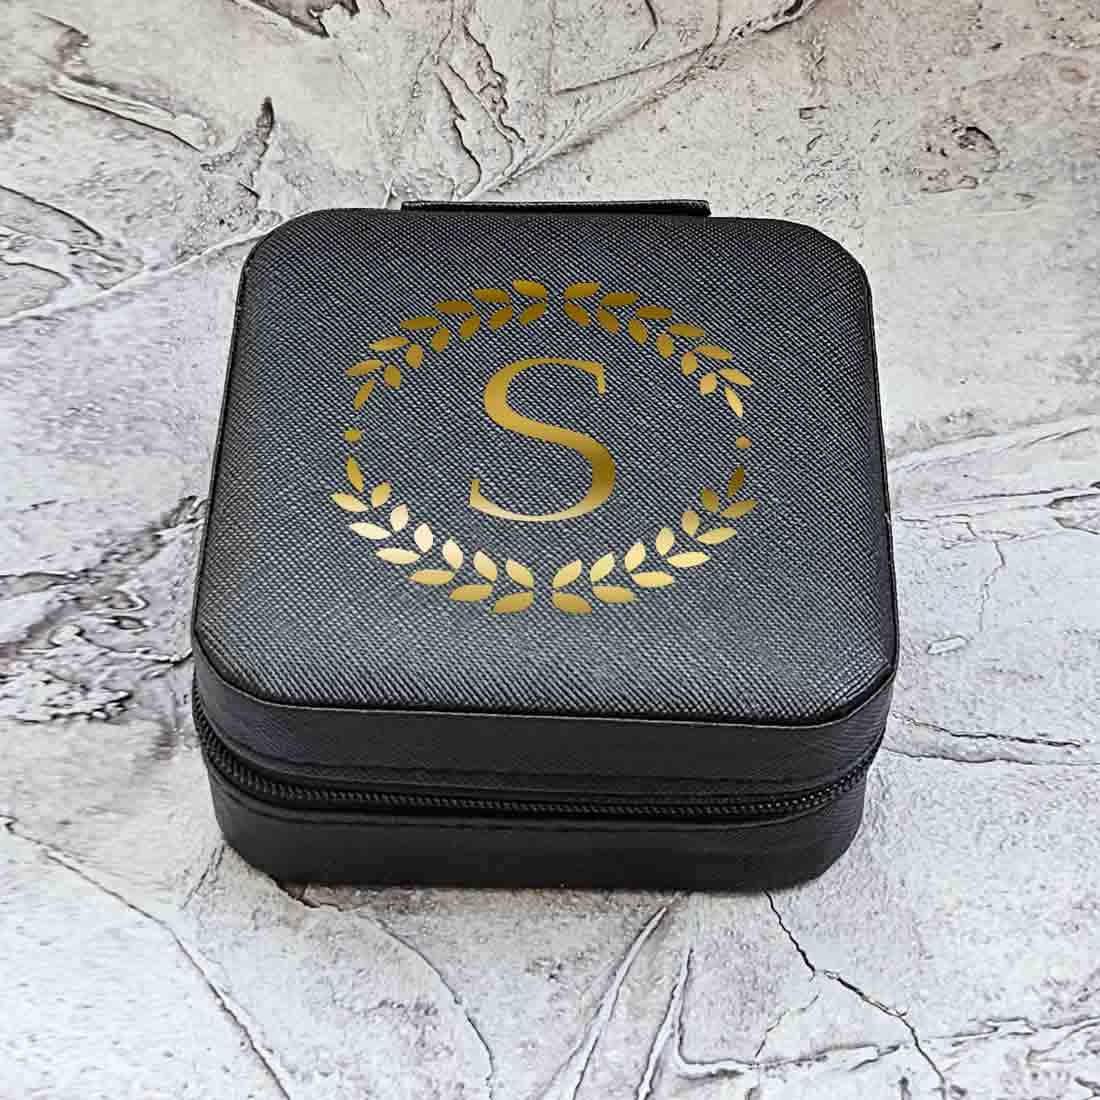 Personalized PU Leather Jewelry Box for Gift Storage Box Organiser Case with Rings Earrings Slots